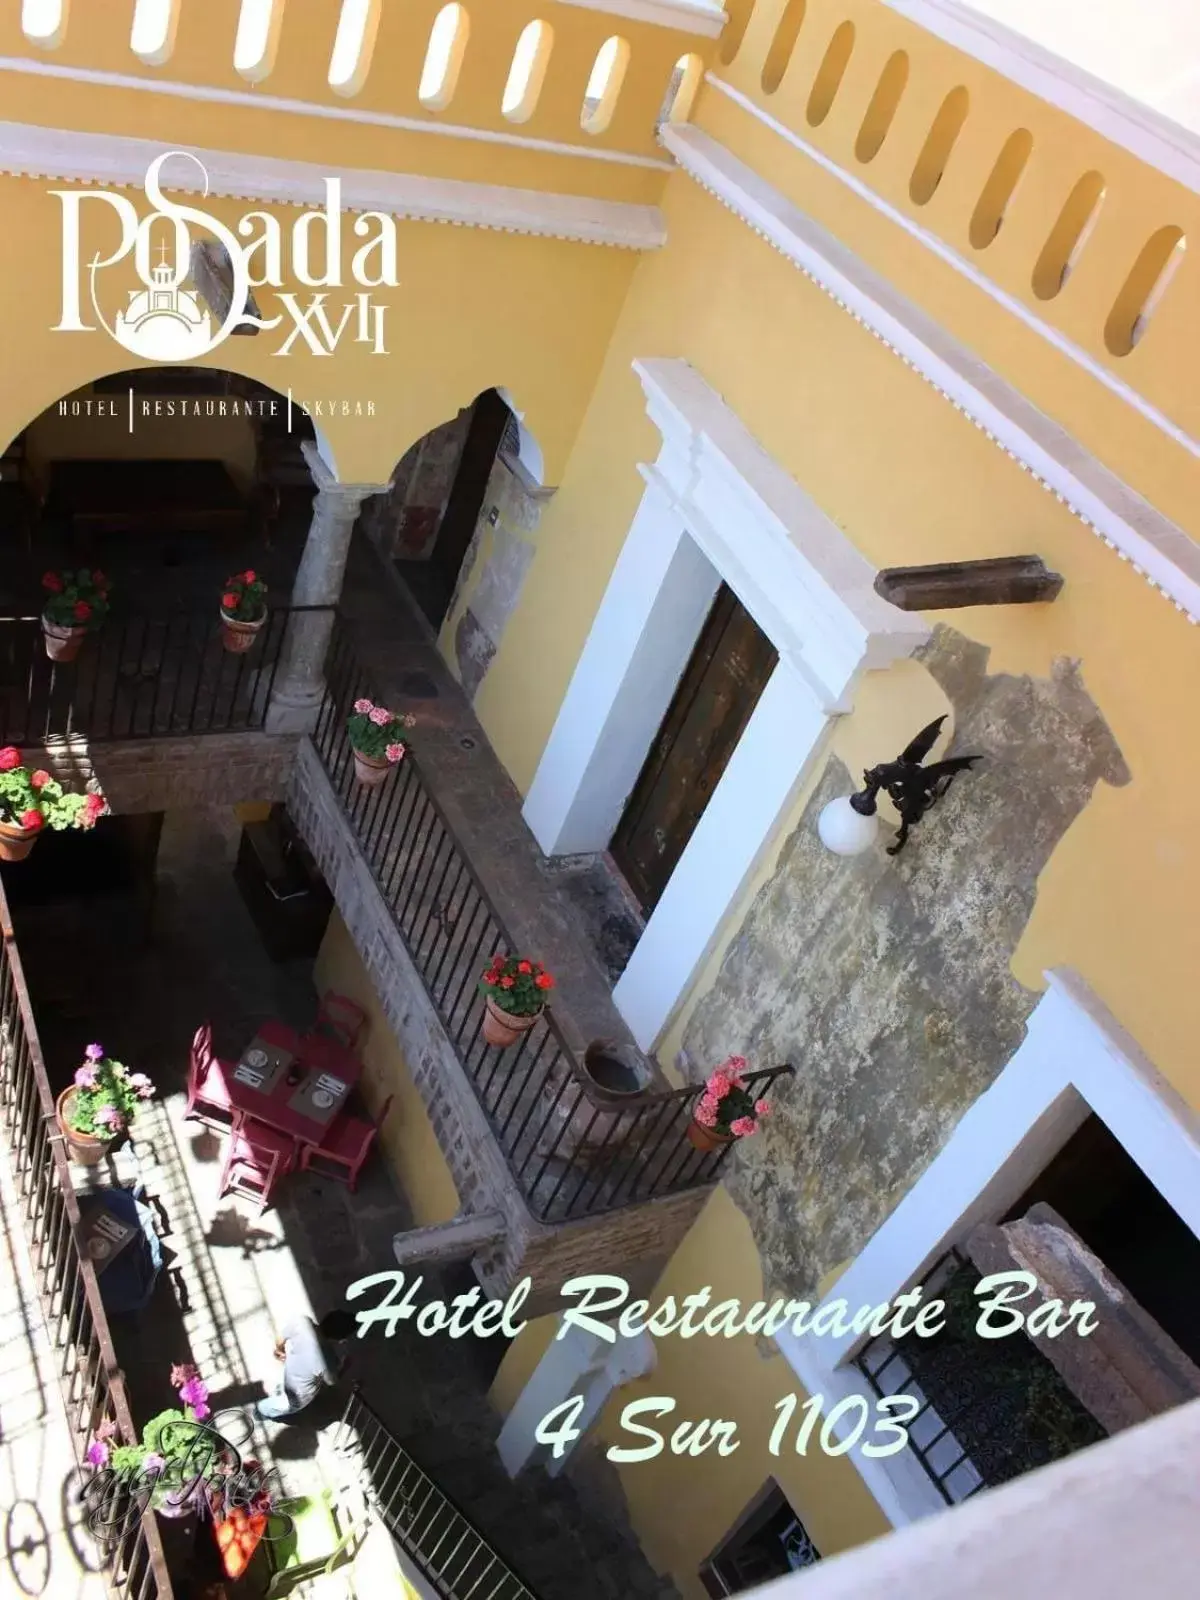 View (from property/room), Bird's-eye View in Hotel Boutique Posada XVII